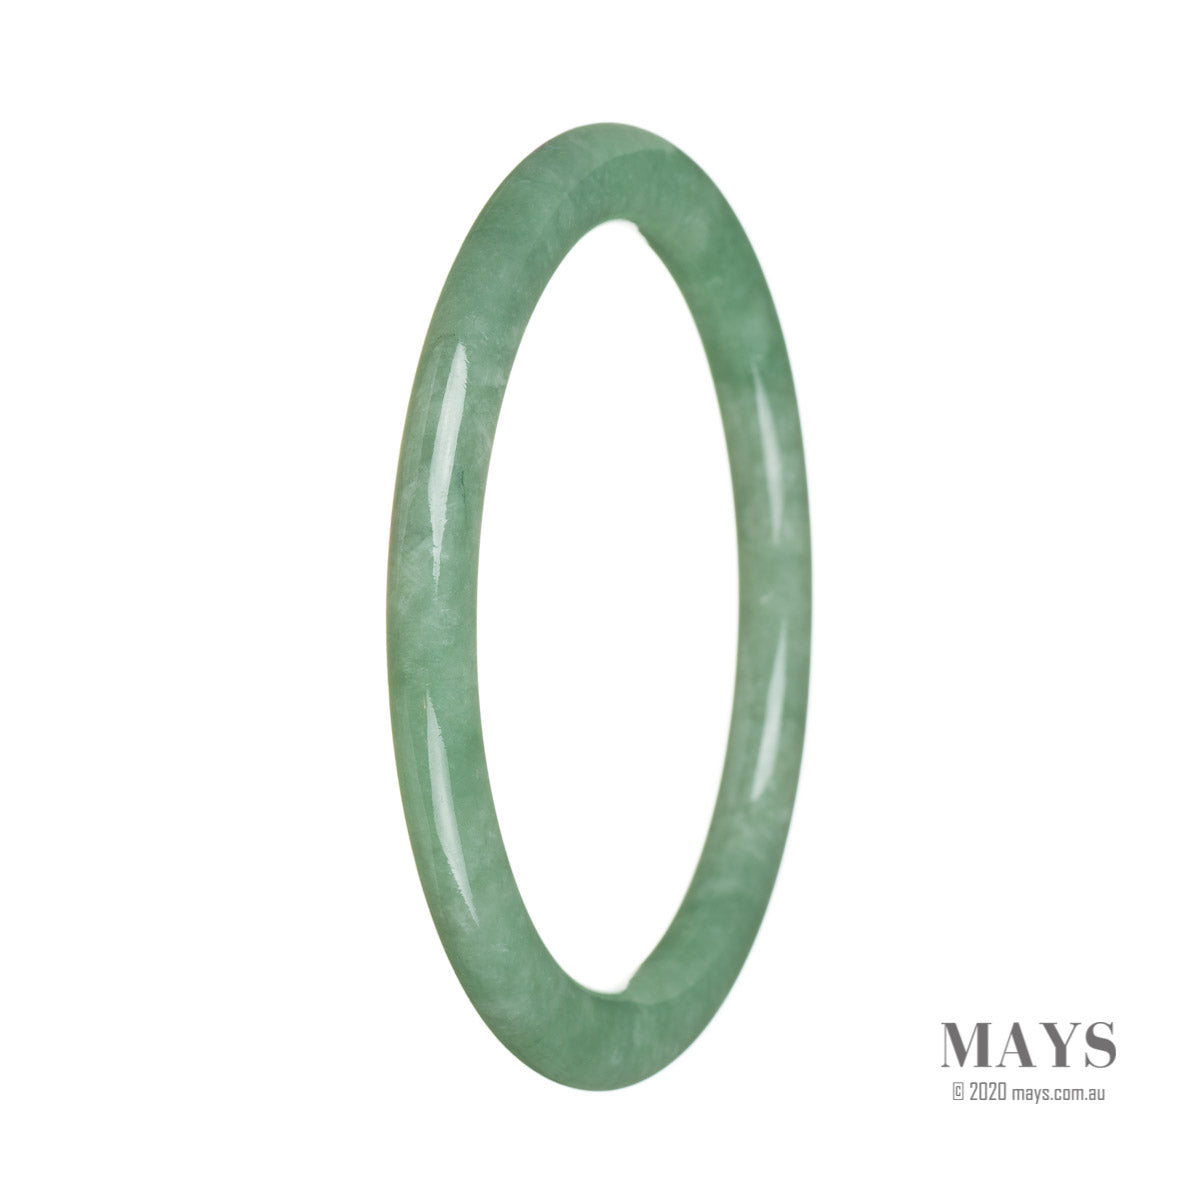 A close-up photo of a beautiful, bright green jadeite bracelet. It is made with high-quality, certified grade A jadeite and features petite round beads with a diameter of 63mm. The bracelet is from the brand MAYS.